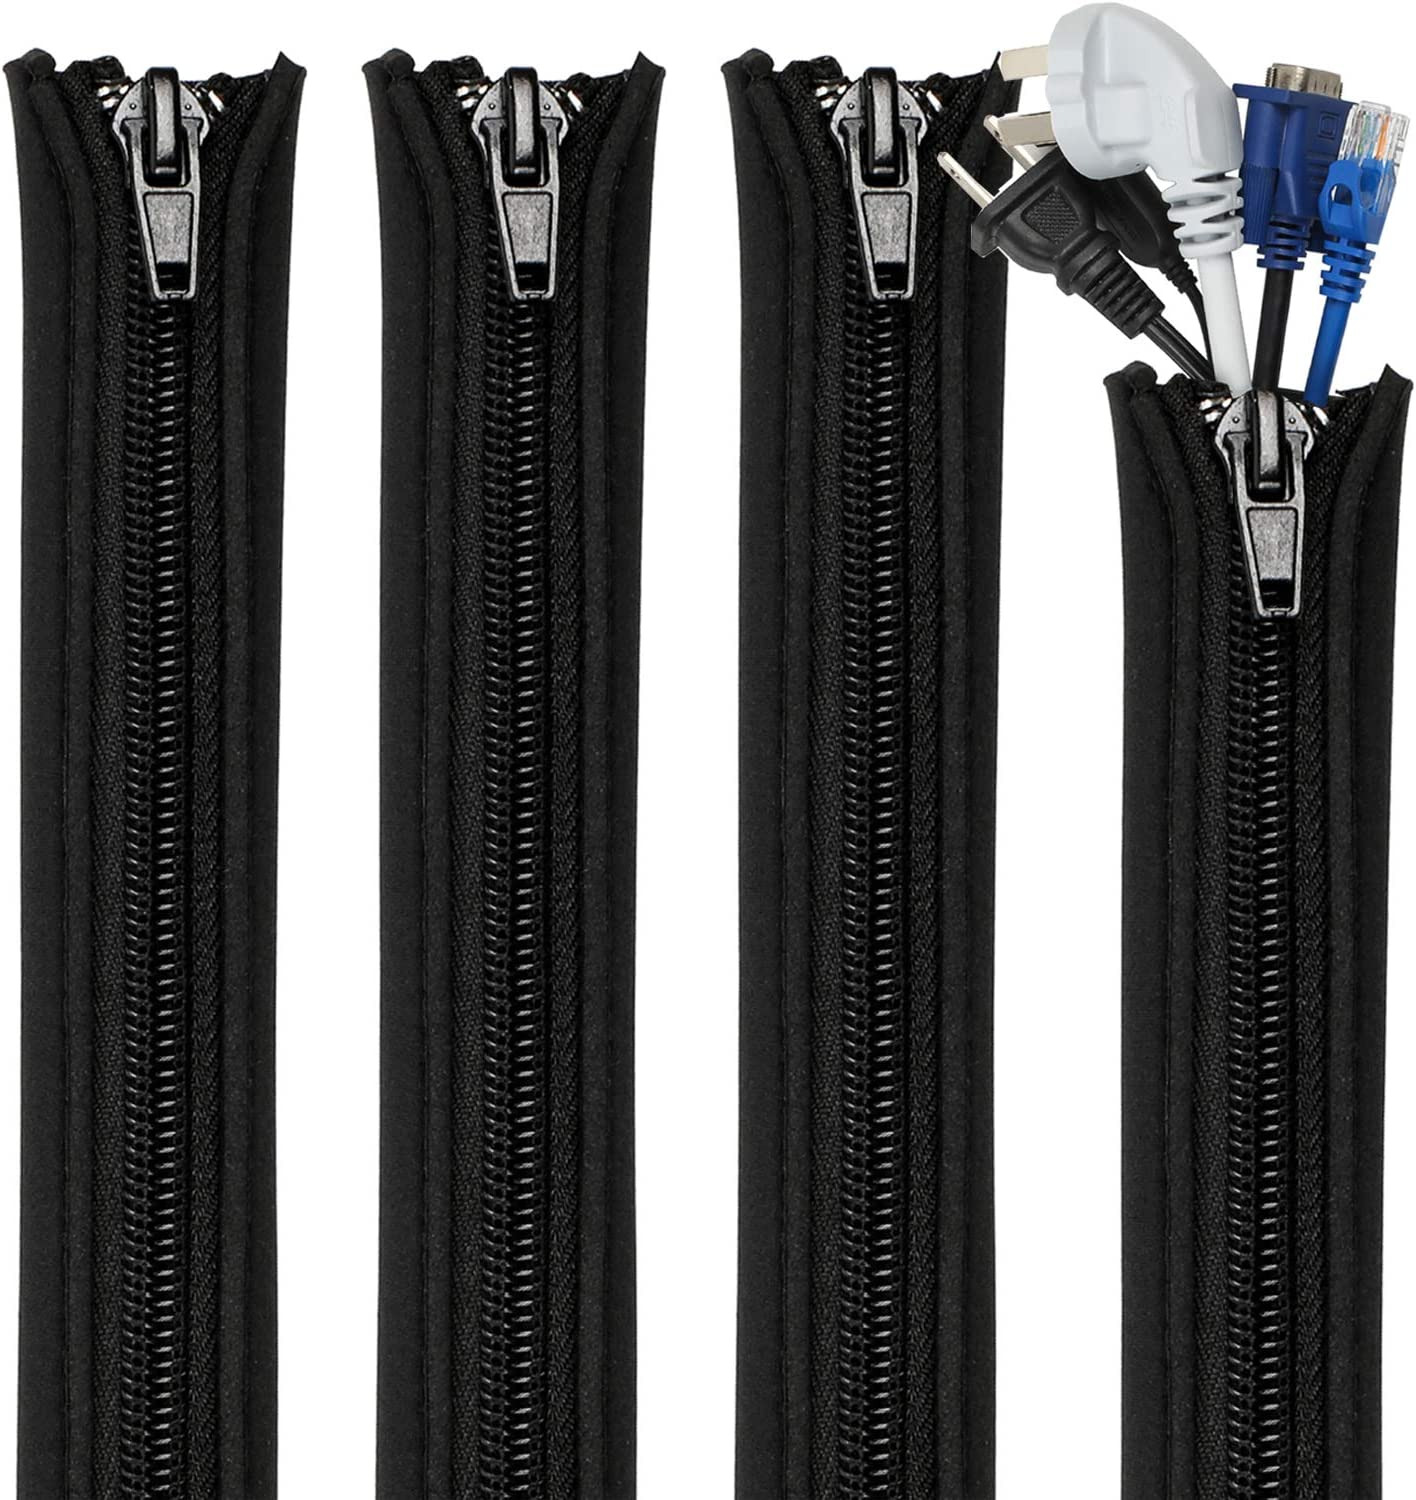 Teskyer 4 Pack Cable Management Sleeves, Cord Organizer Sleeve with Zipper, Wire